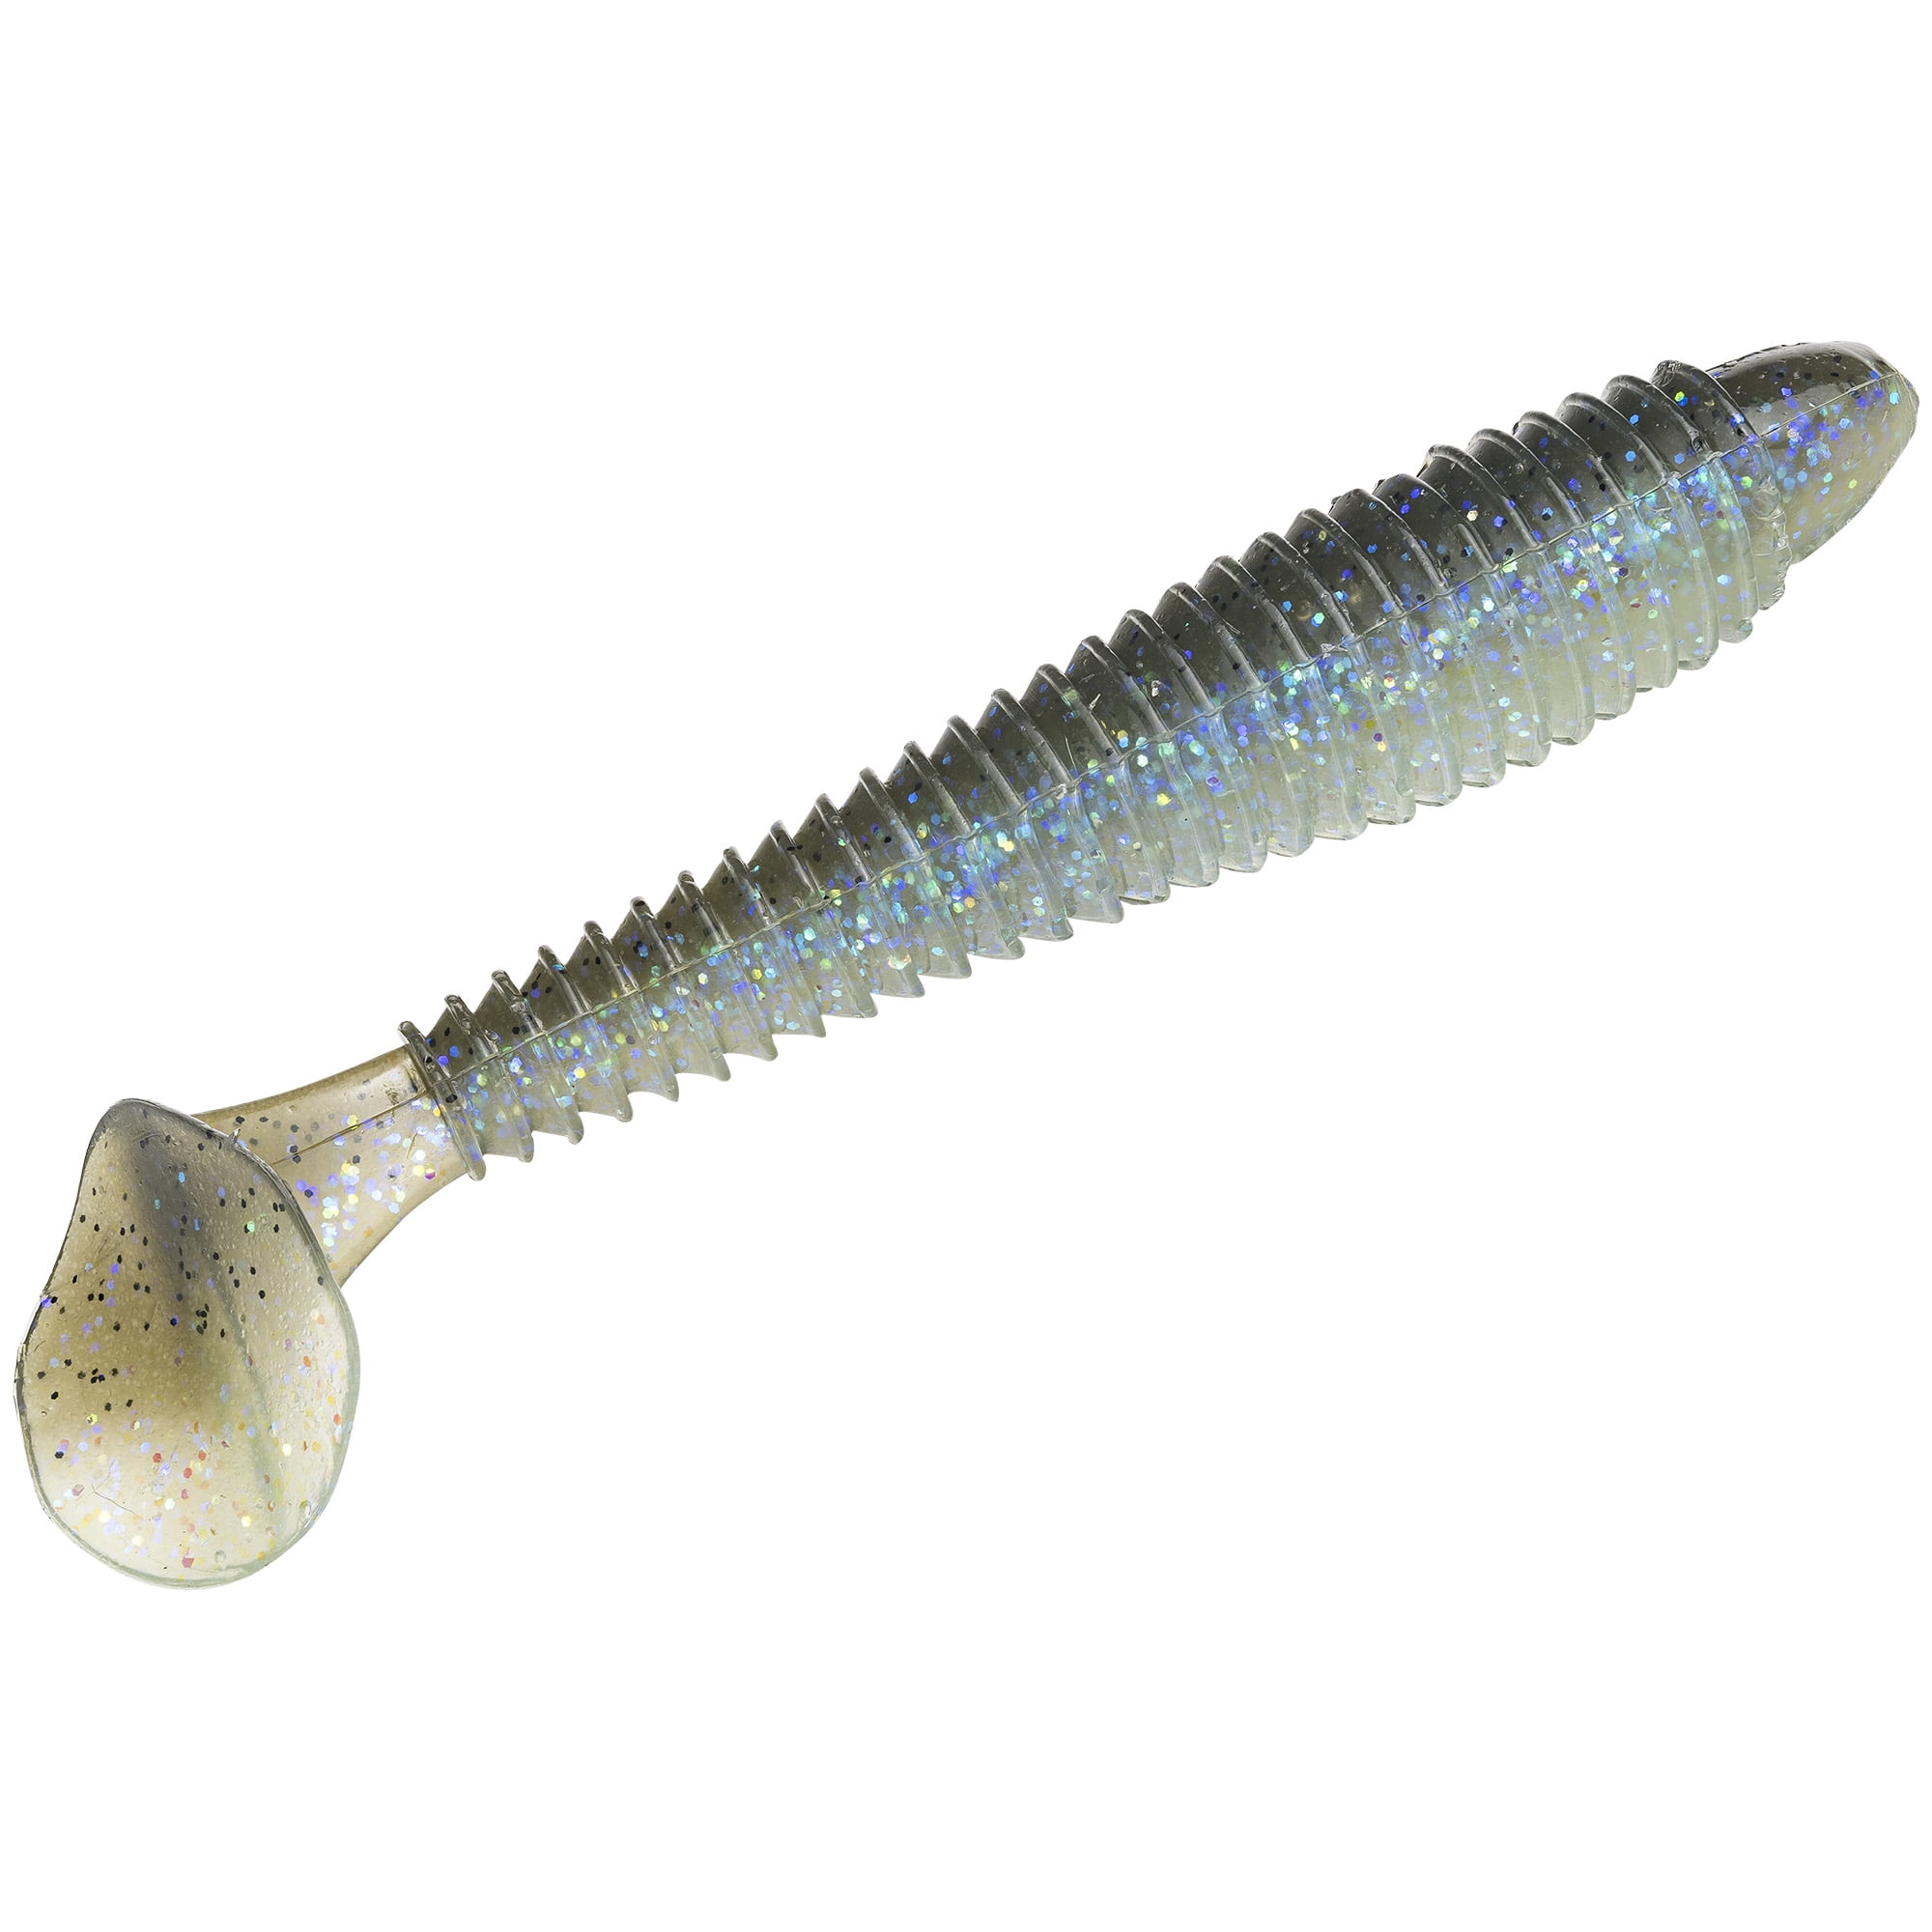 Strike King Rage Swimmer Lure Electric Shad - 5 ct